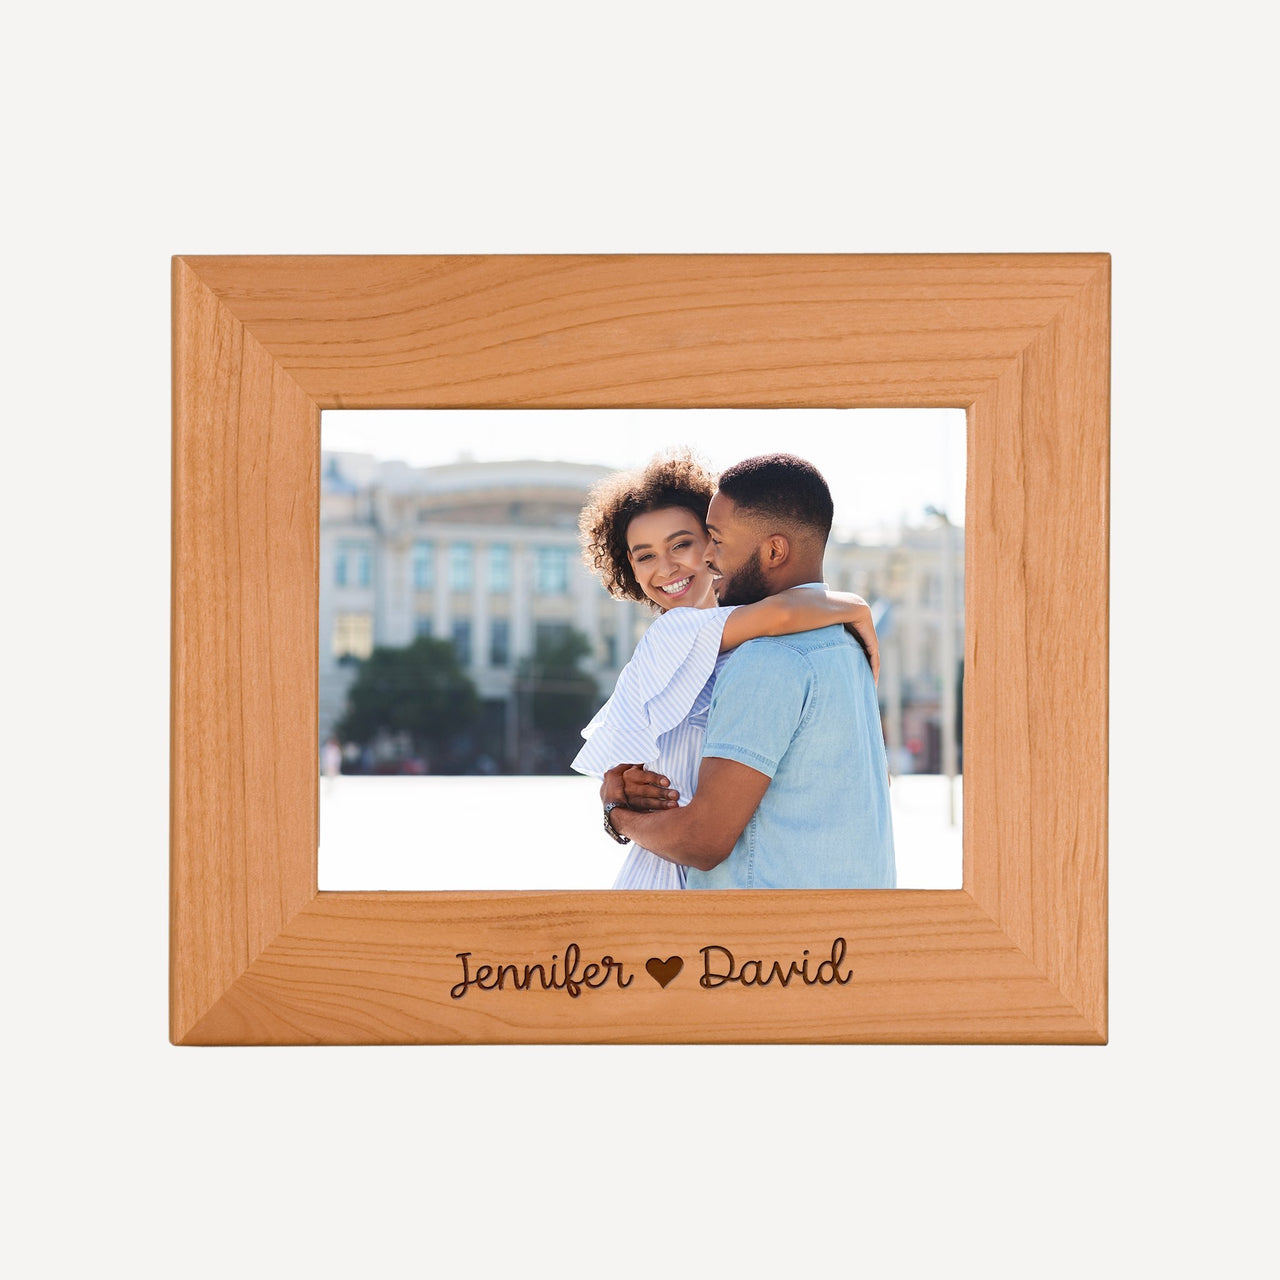 Personalized Wood Picture Frame - Names with Heart - Mod Peach